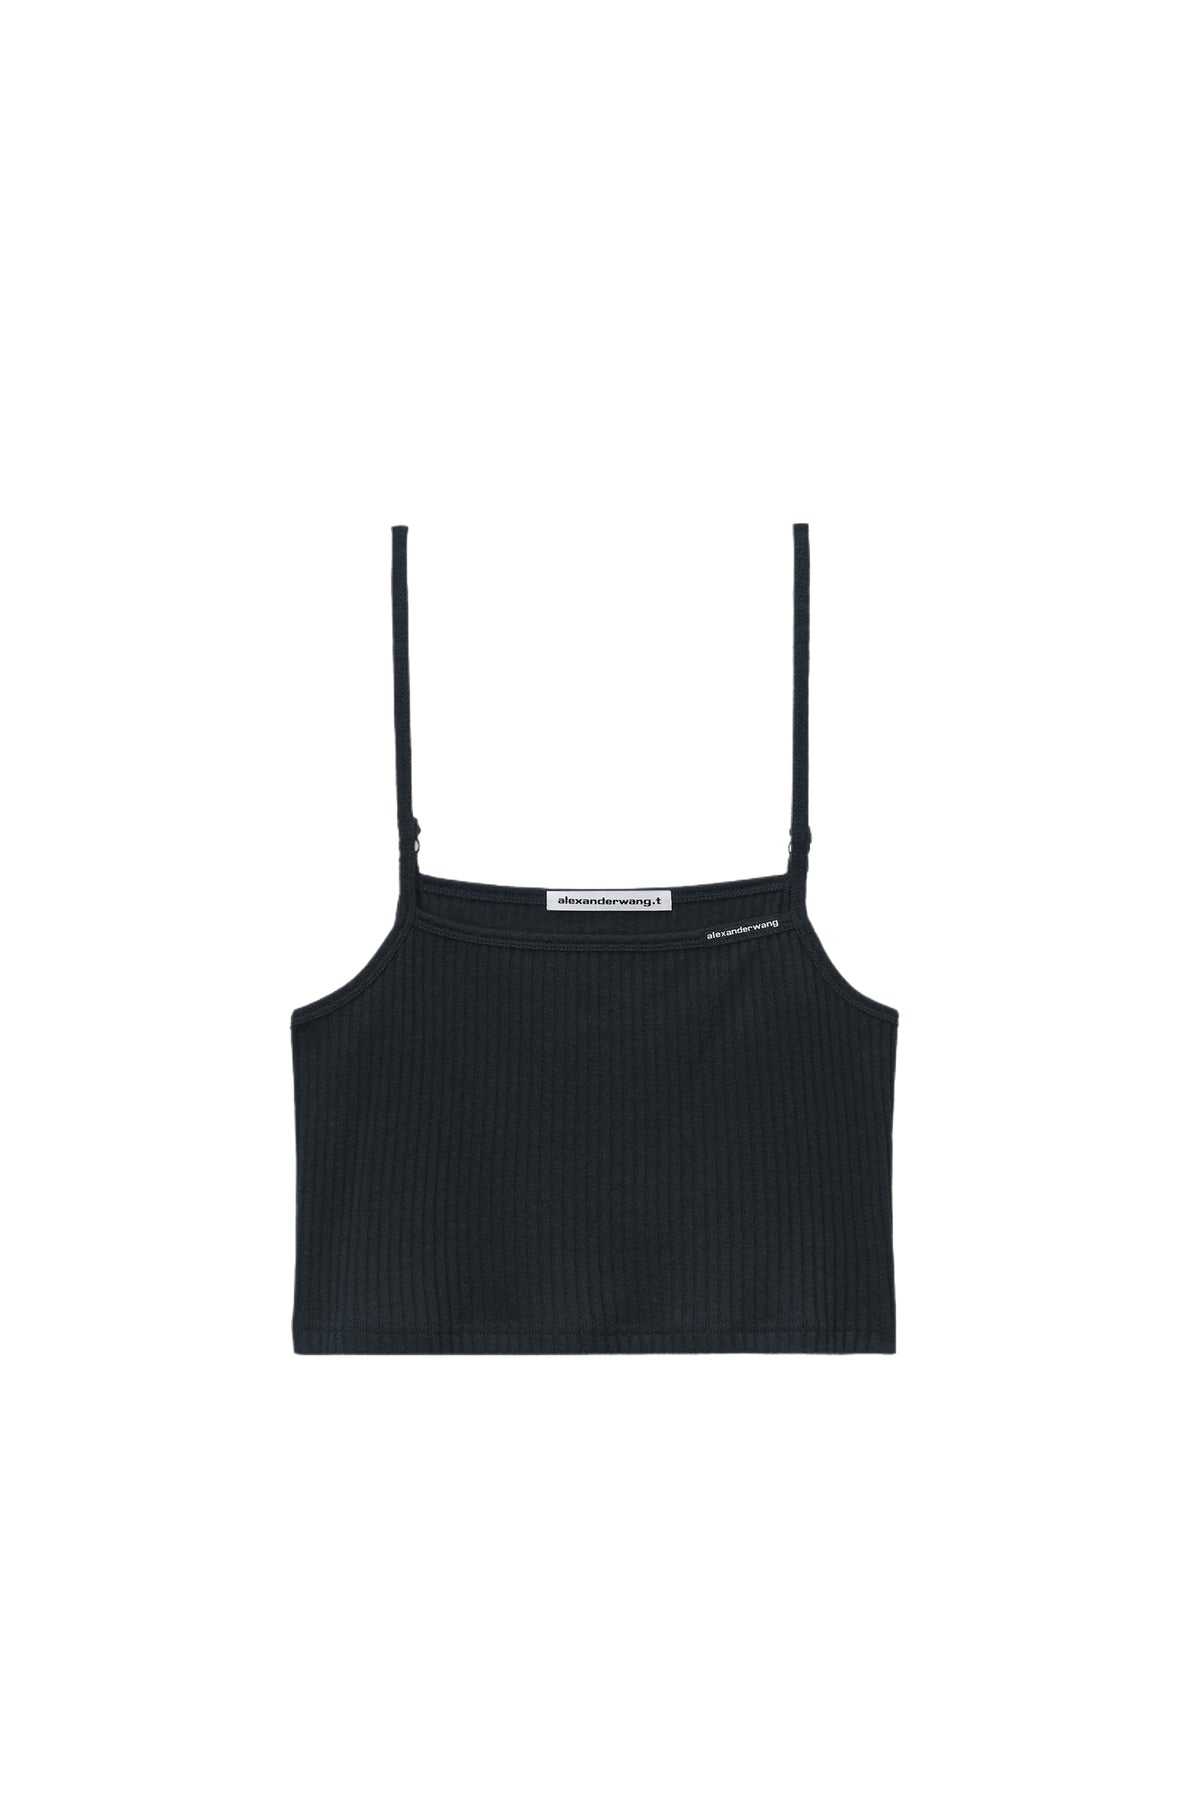 CAMI TOP W/ SKINNY WOVEN LABEL / BLK